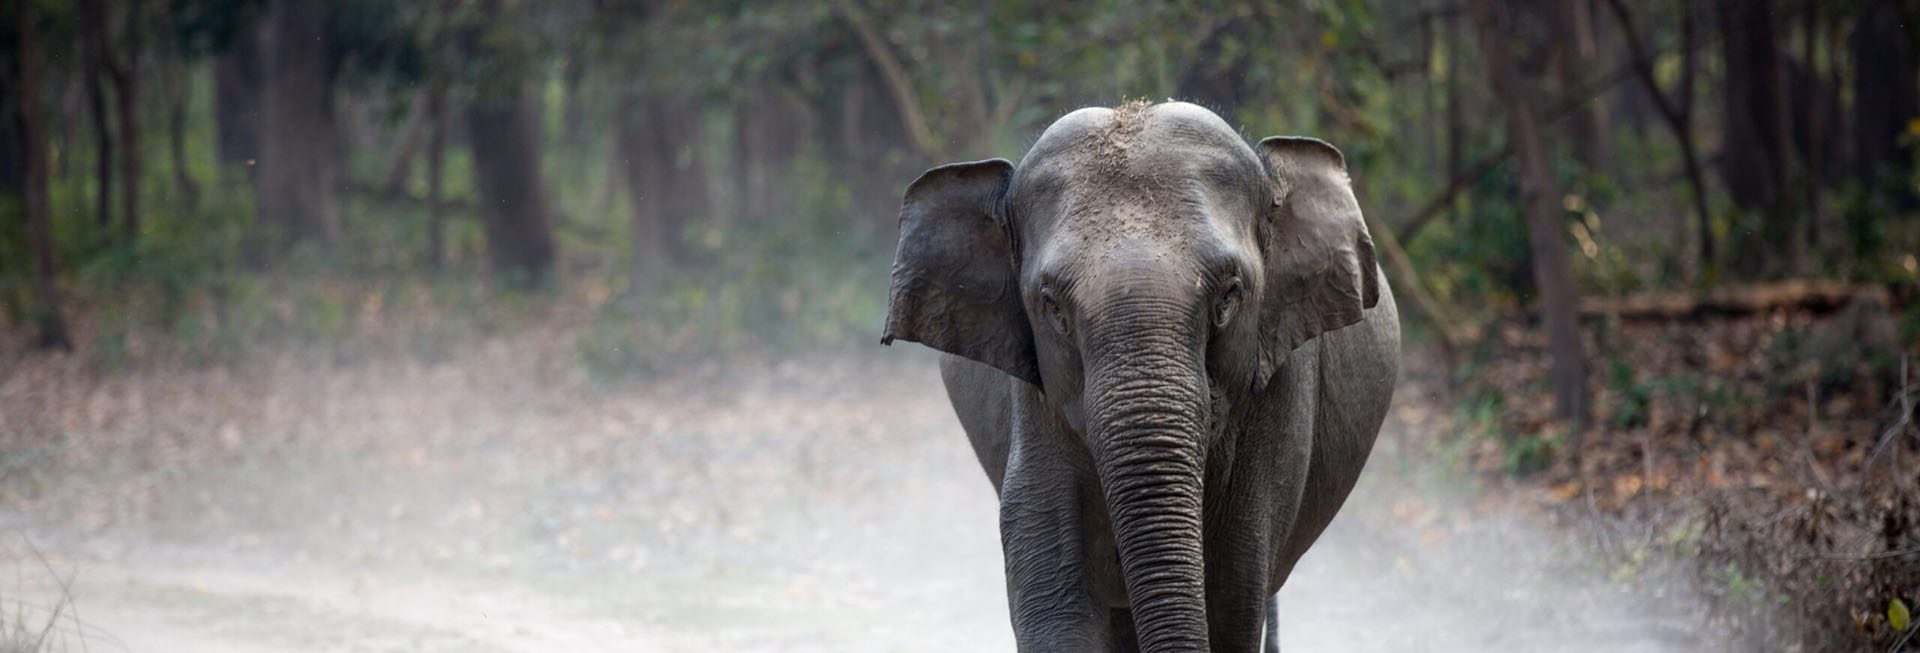 an elephant walking down a dirt road in the woods.